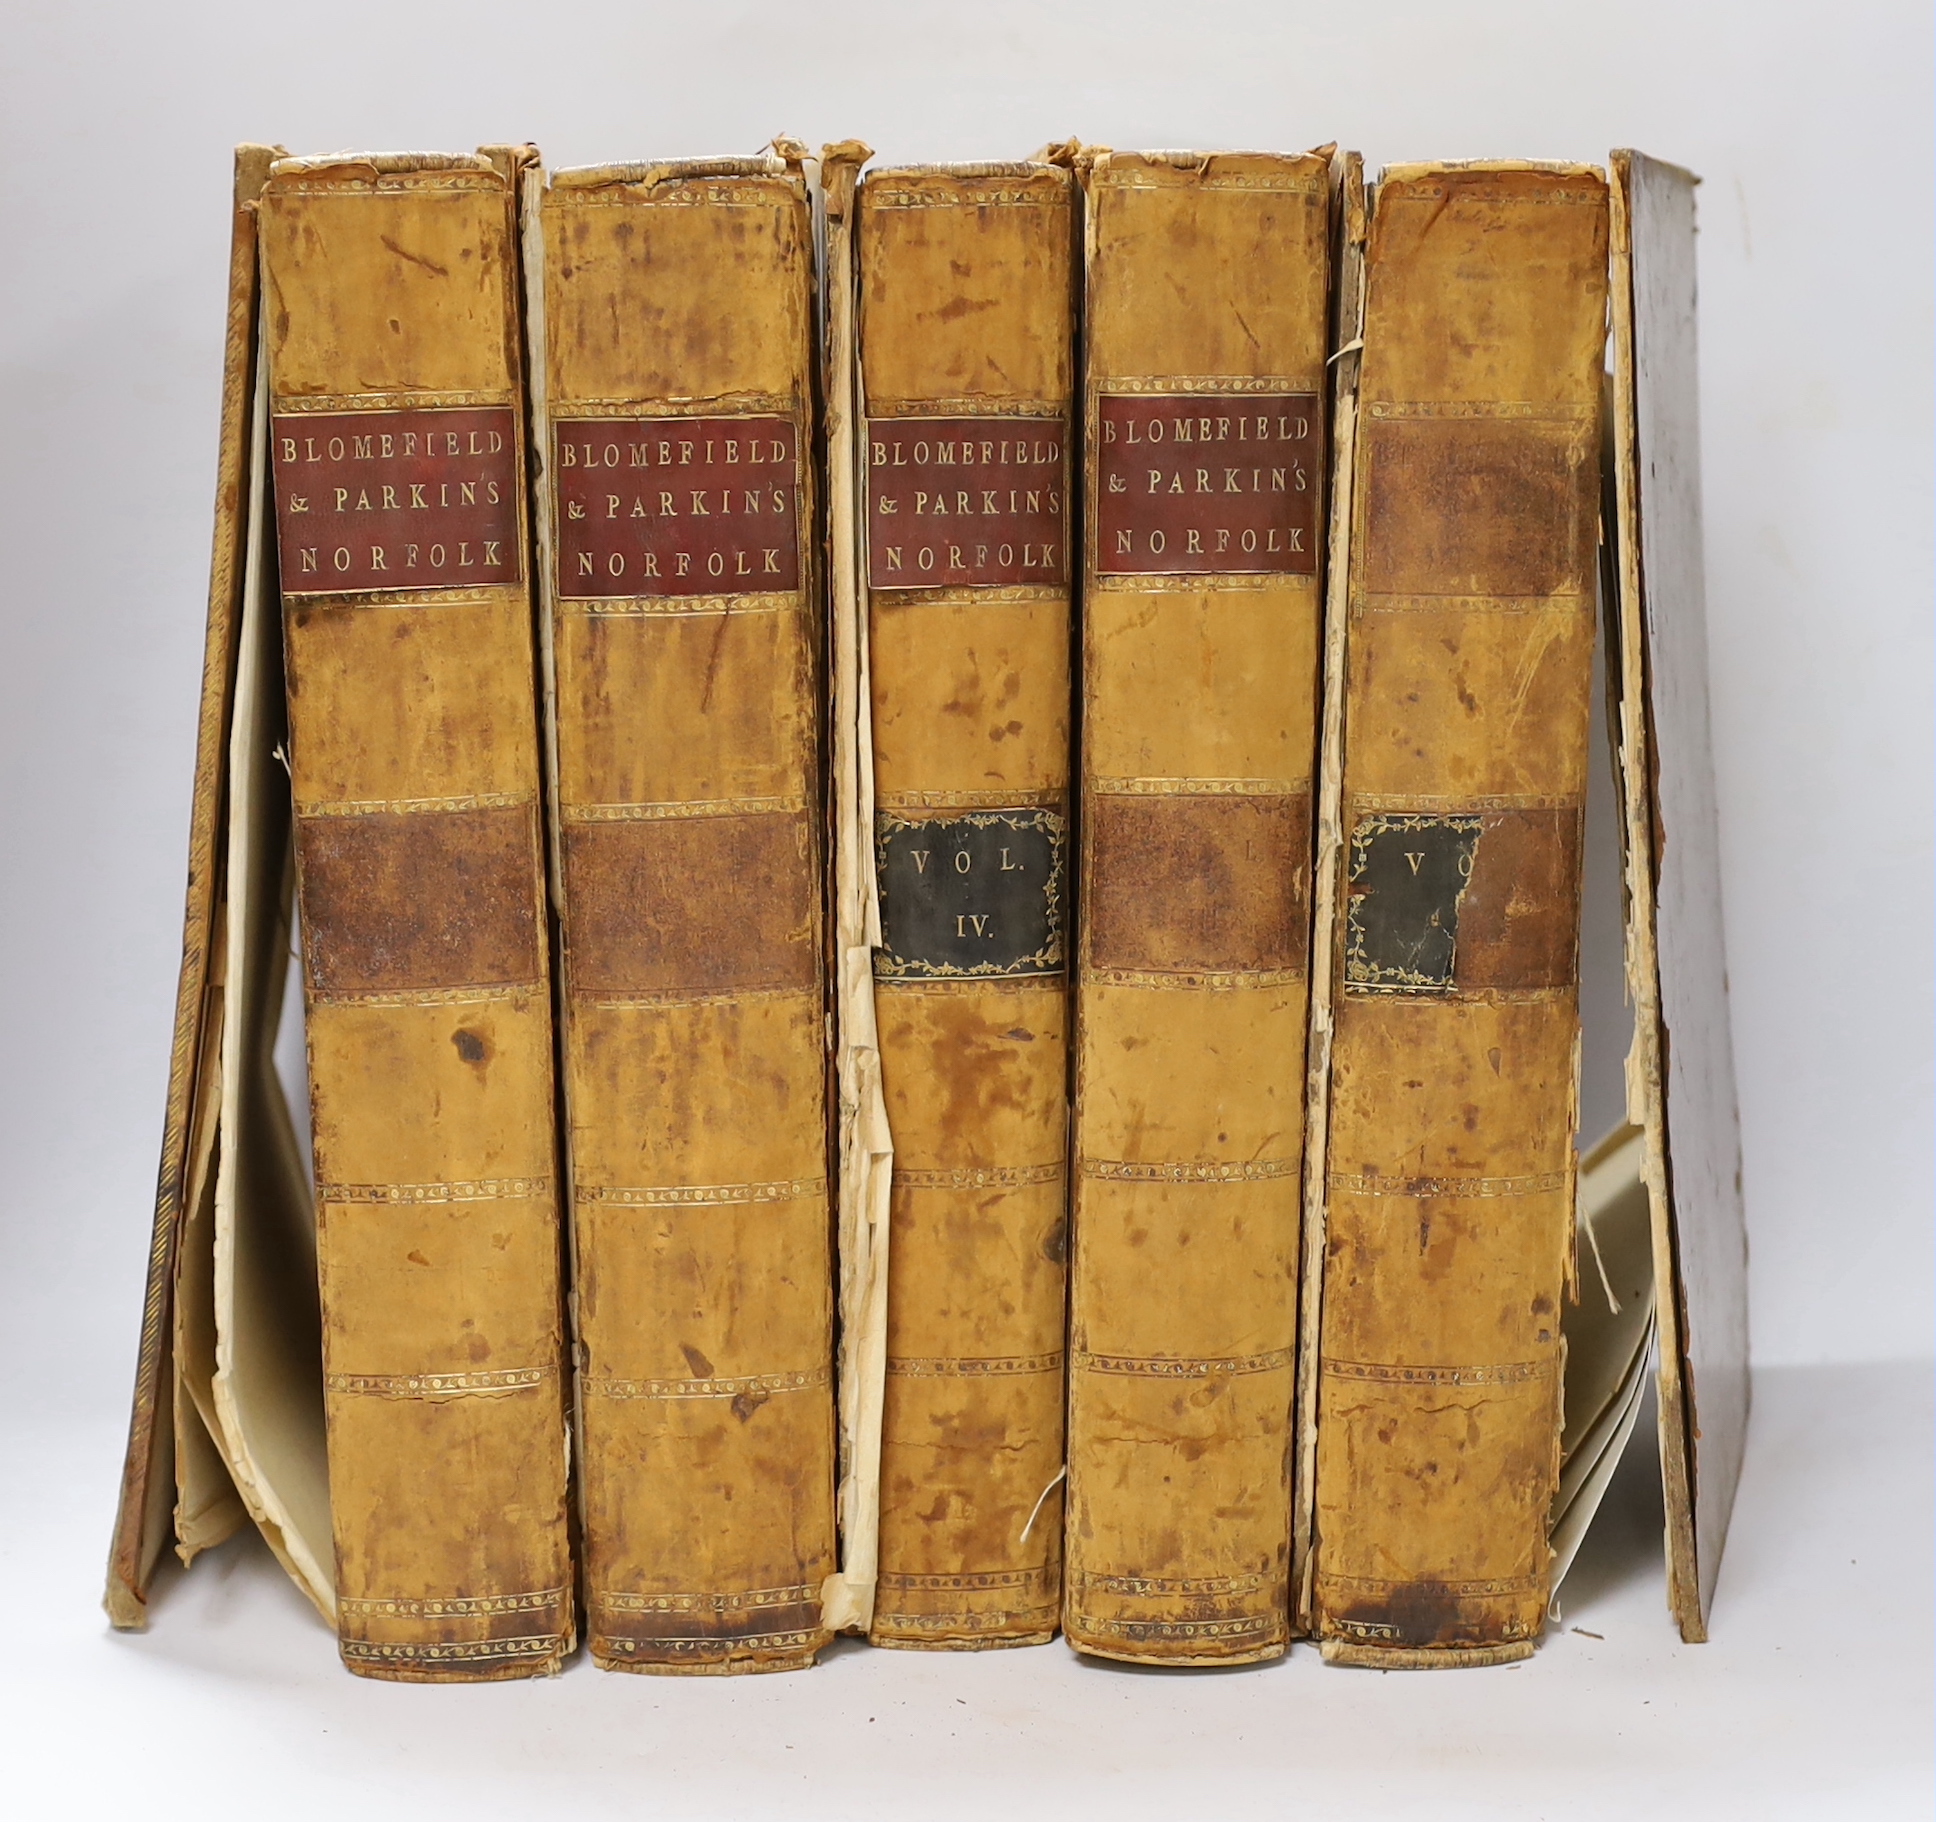 Blomefield, Rev. Francis - Essay towards a Topographical History of the County of Norfolk. First Edition, 5 vols. engraved plates and maps (but some lacking); old calf (distressed), folio. Fersfield, Norwich and Lynn, 17